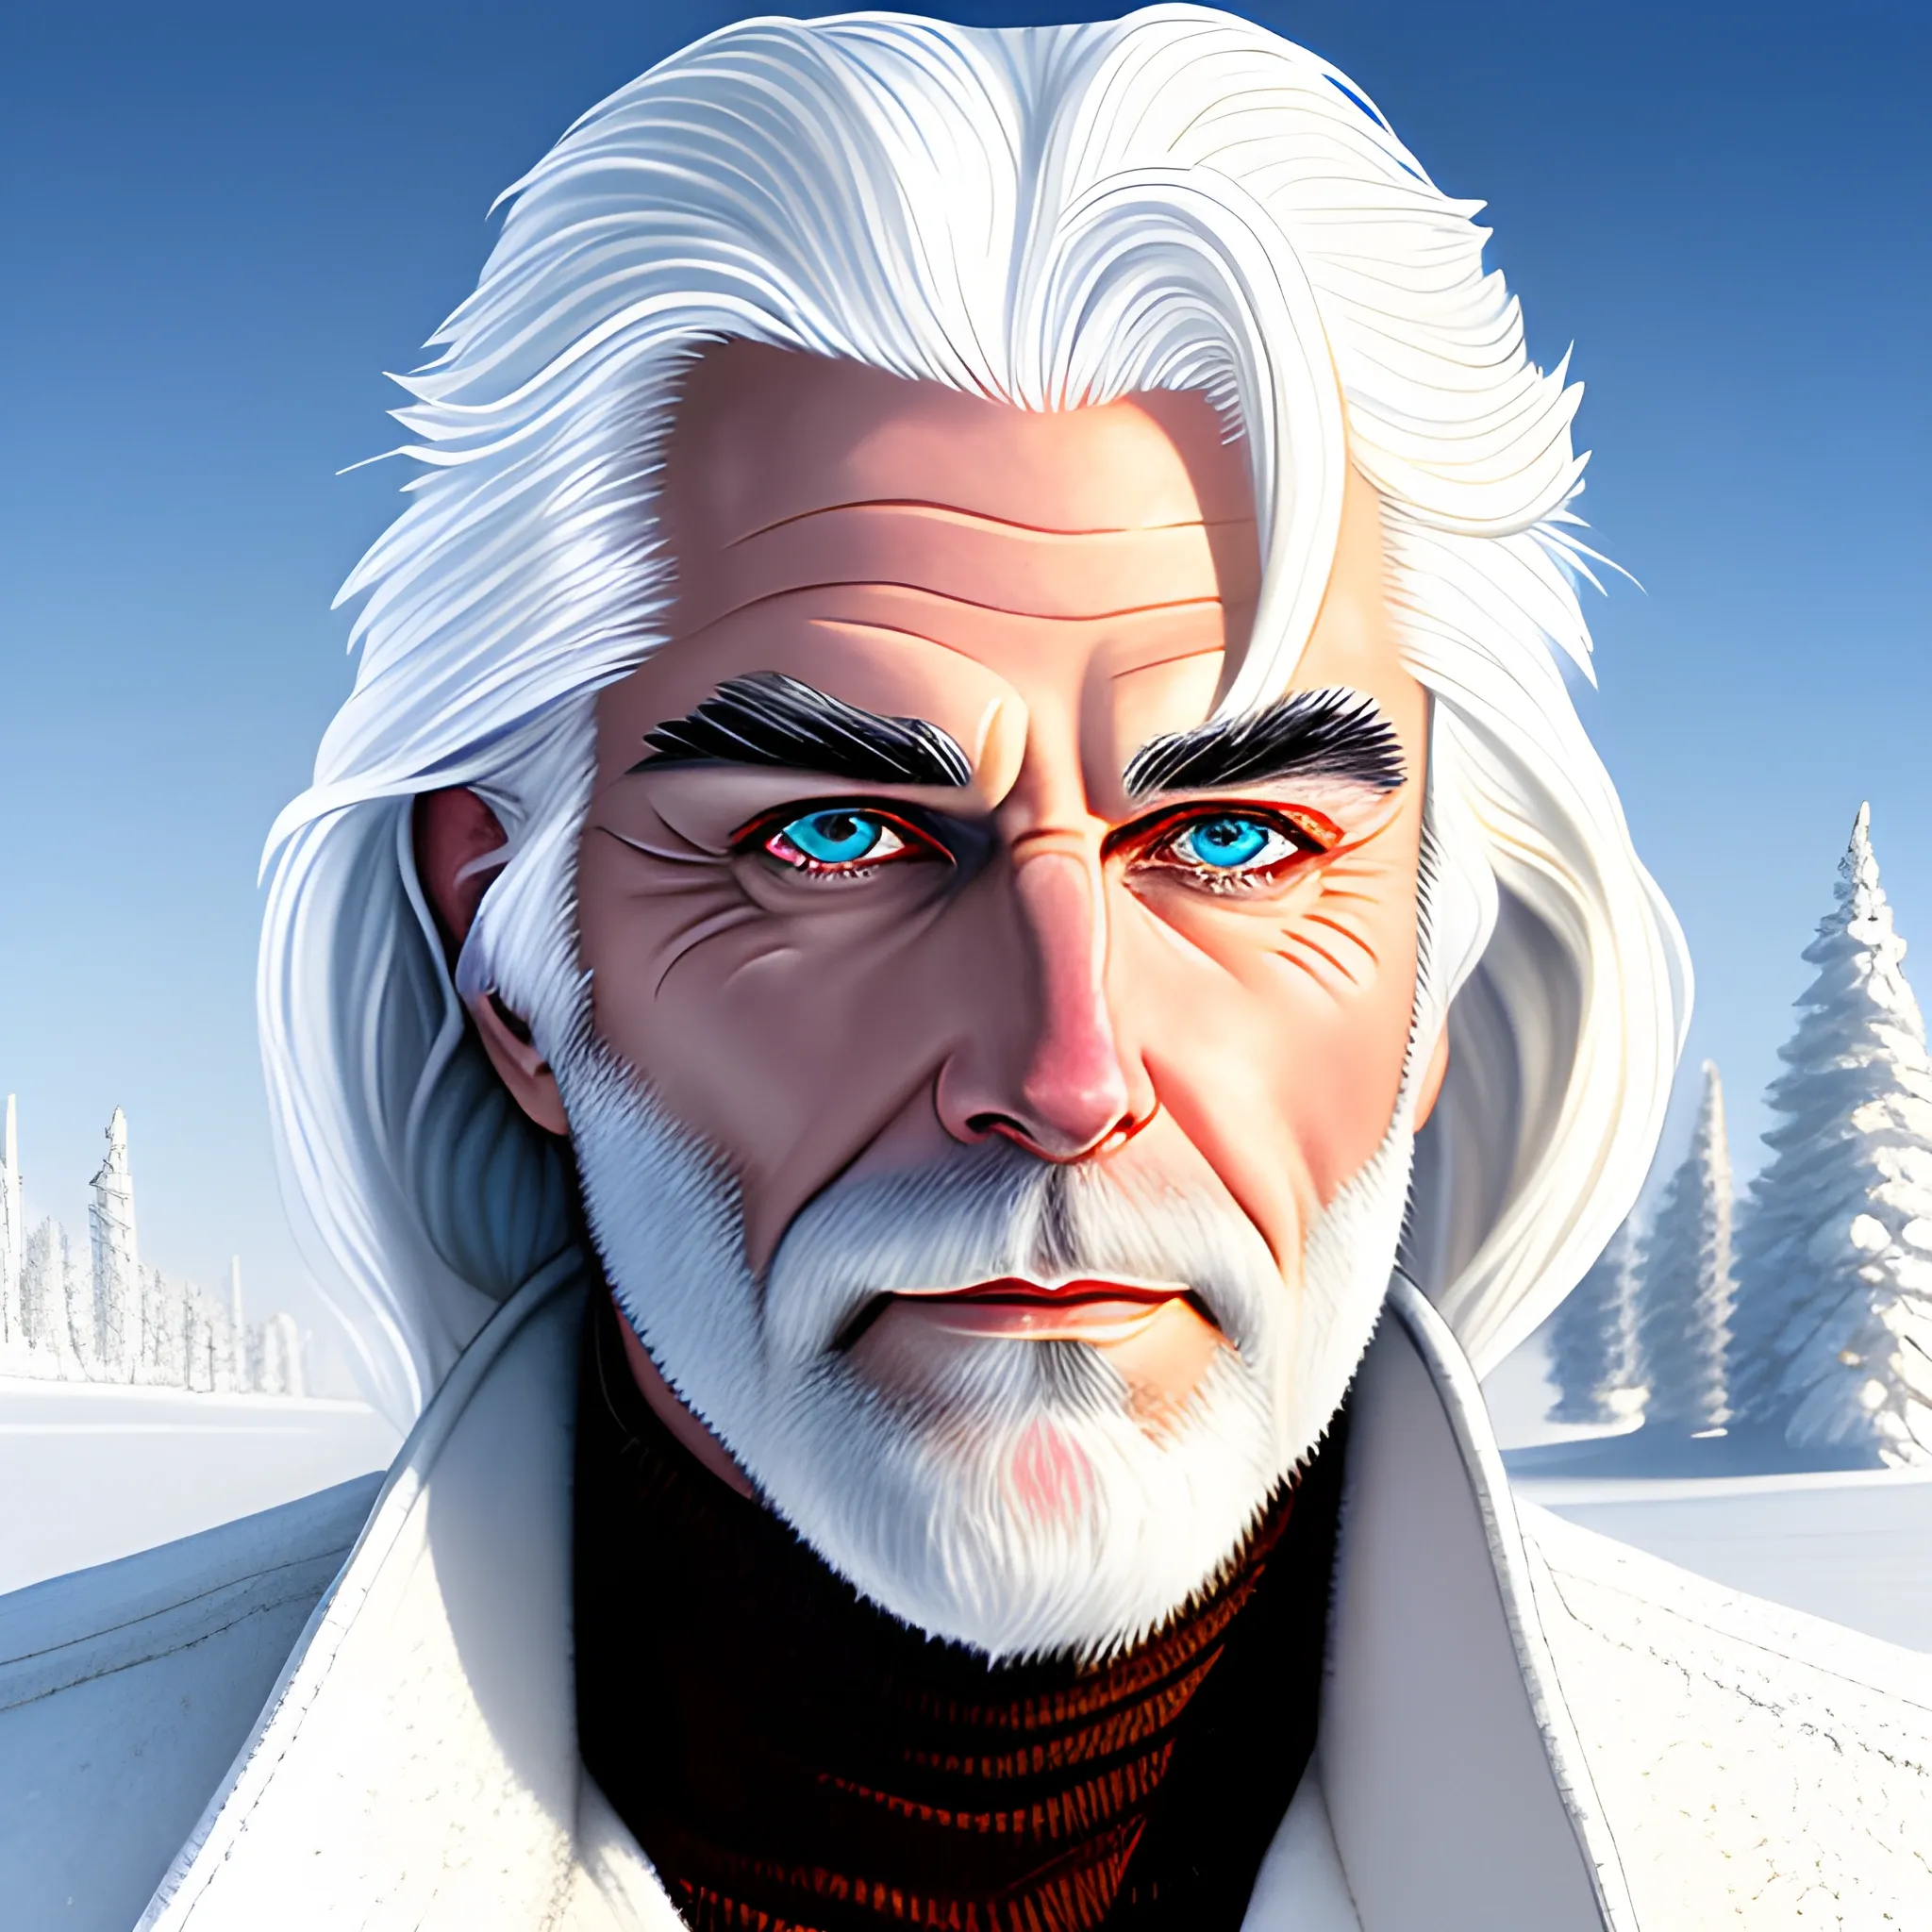 a young human with shoulder lenght white hair, blue eyes, nature in winter background, frosty facial features, larry elmore